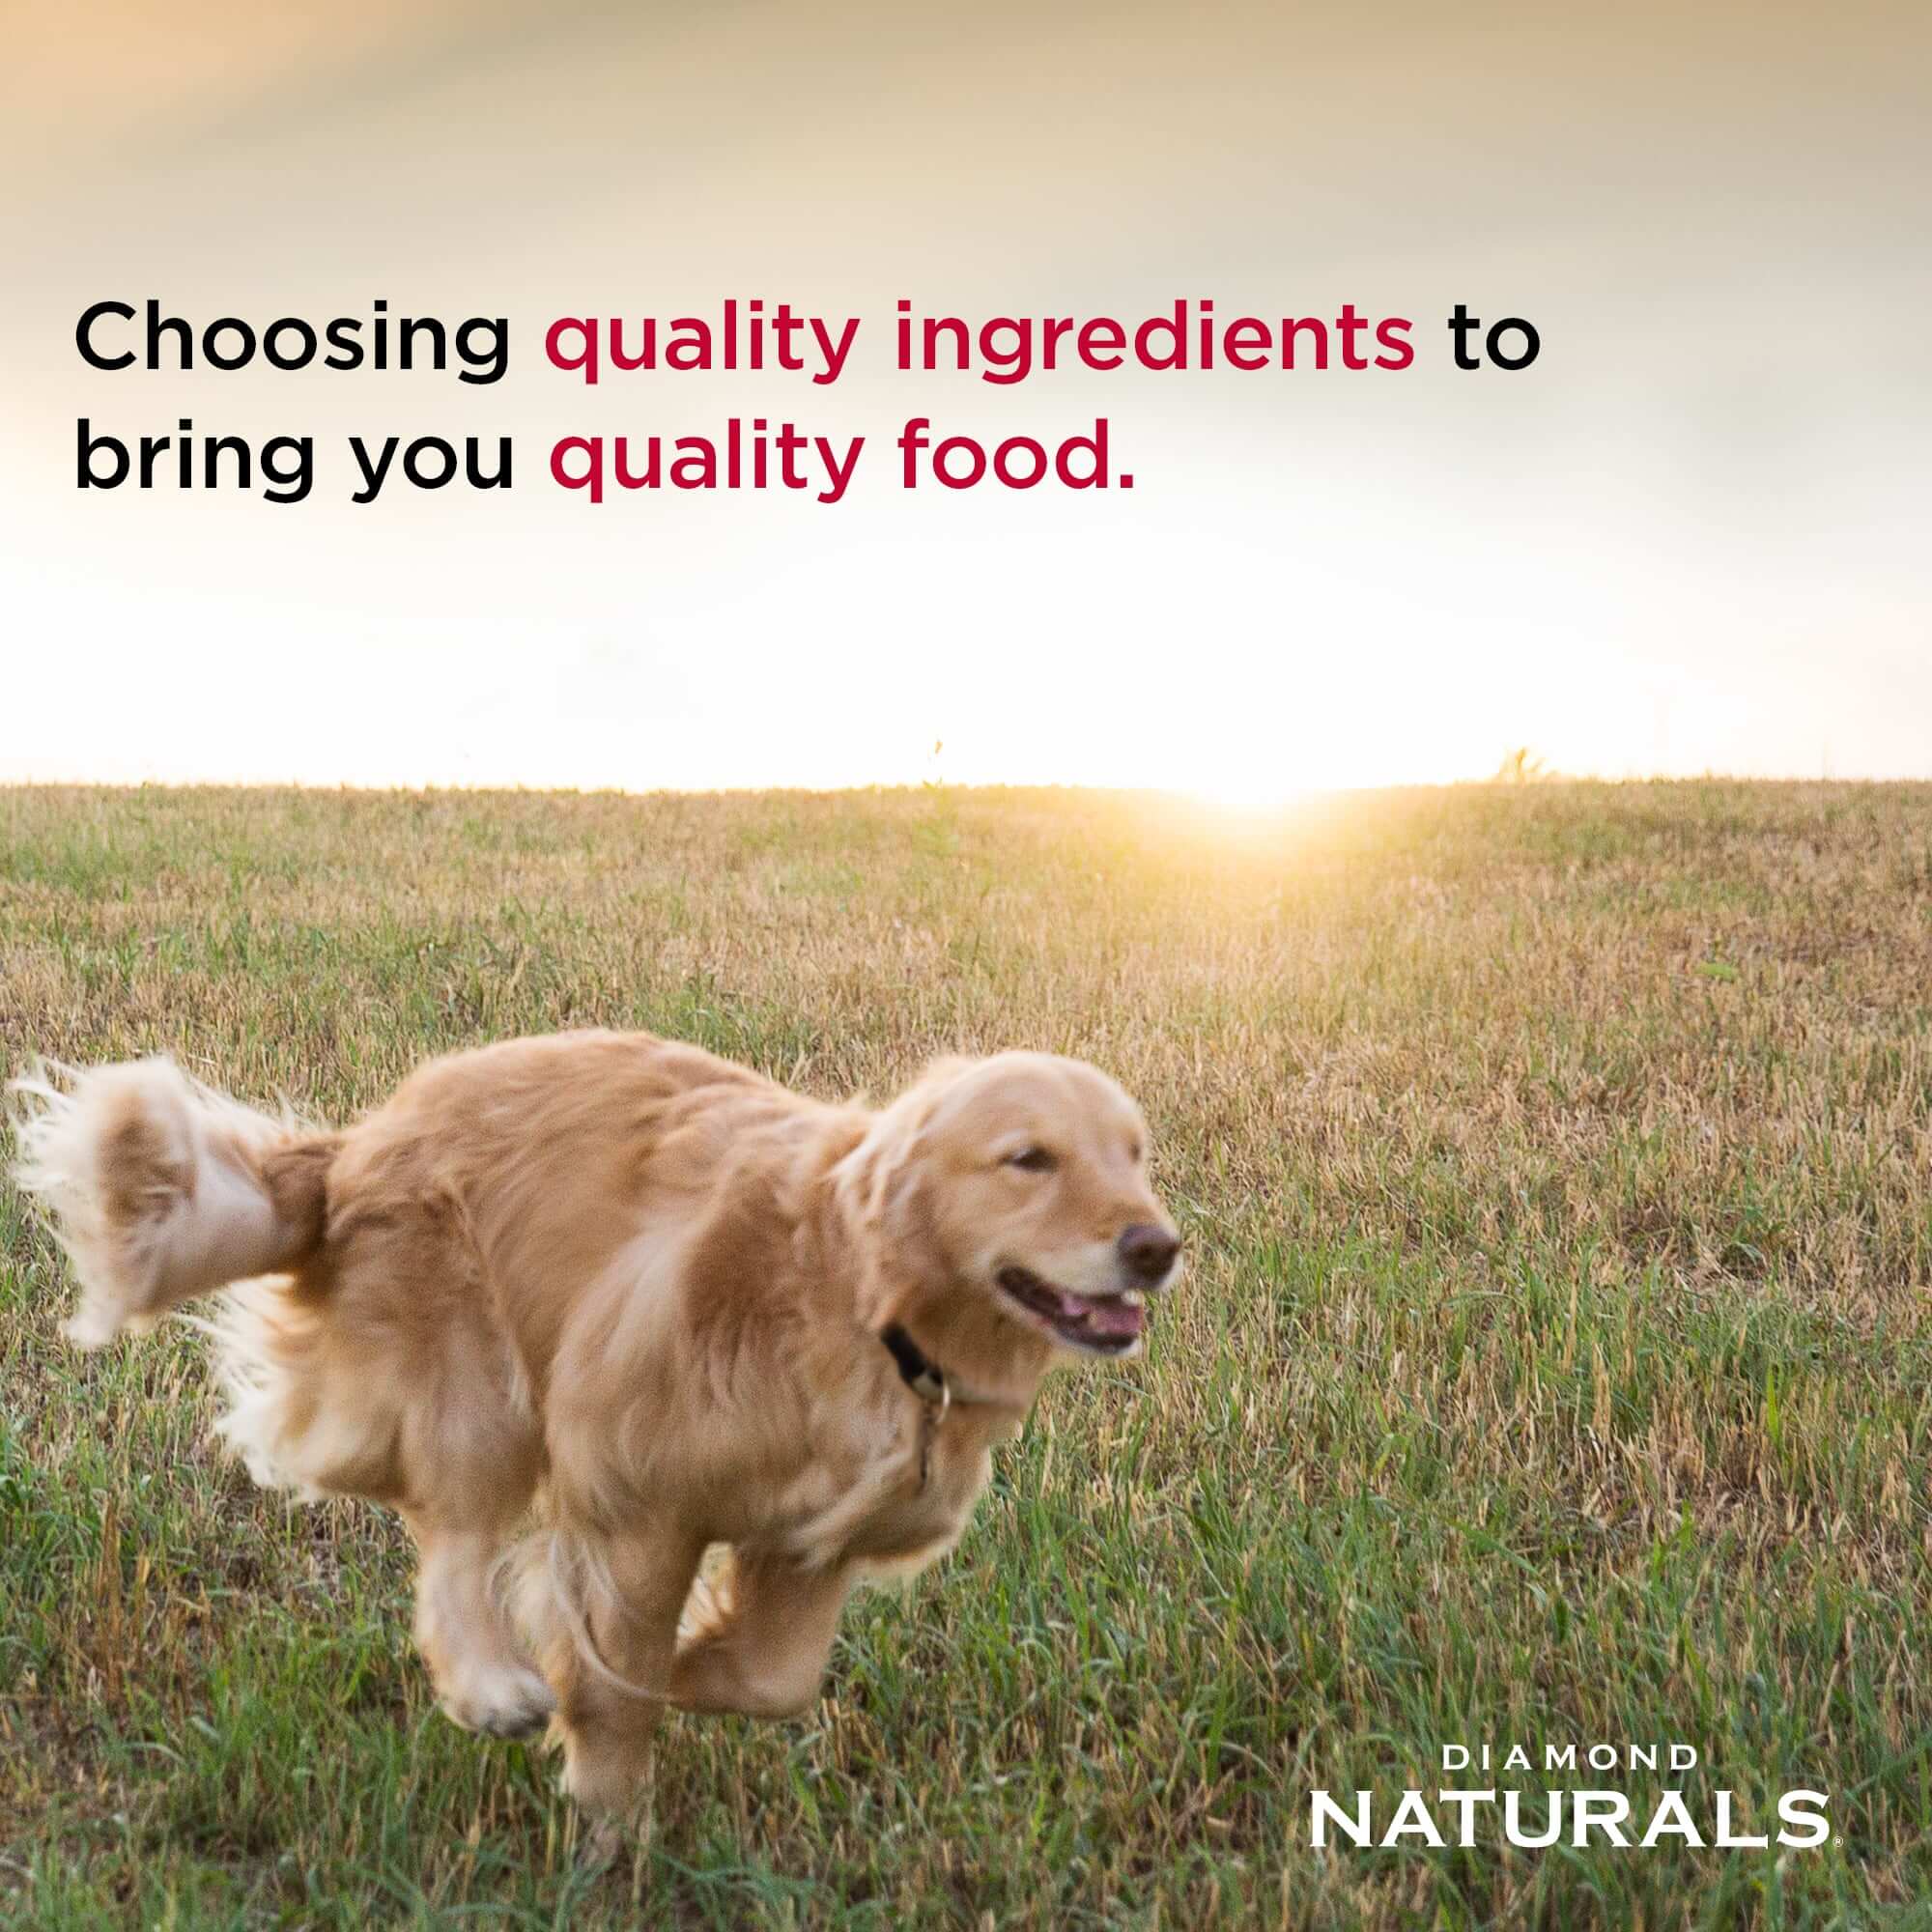 Choosing quality ingredients to bring you quality food